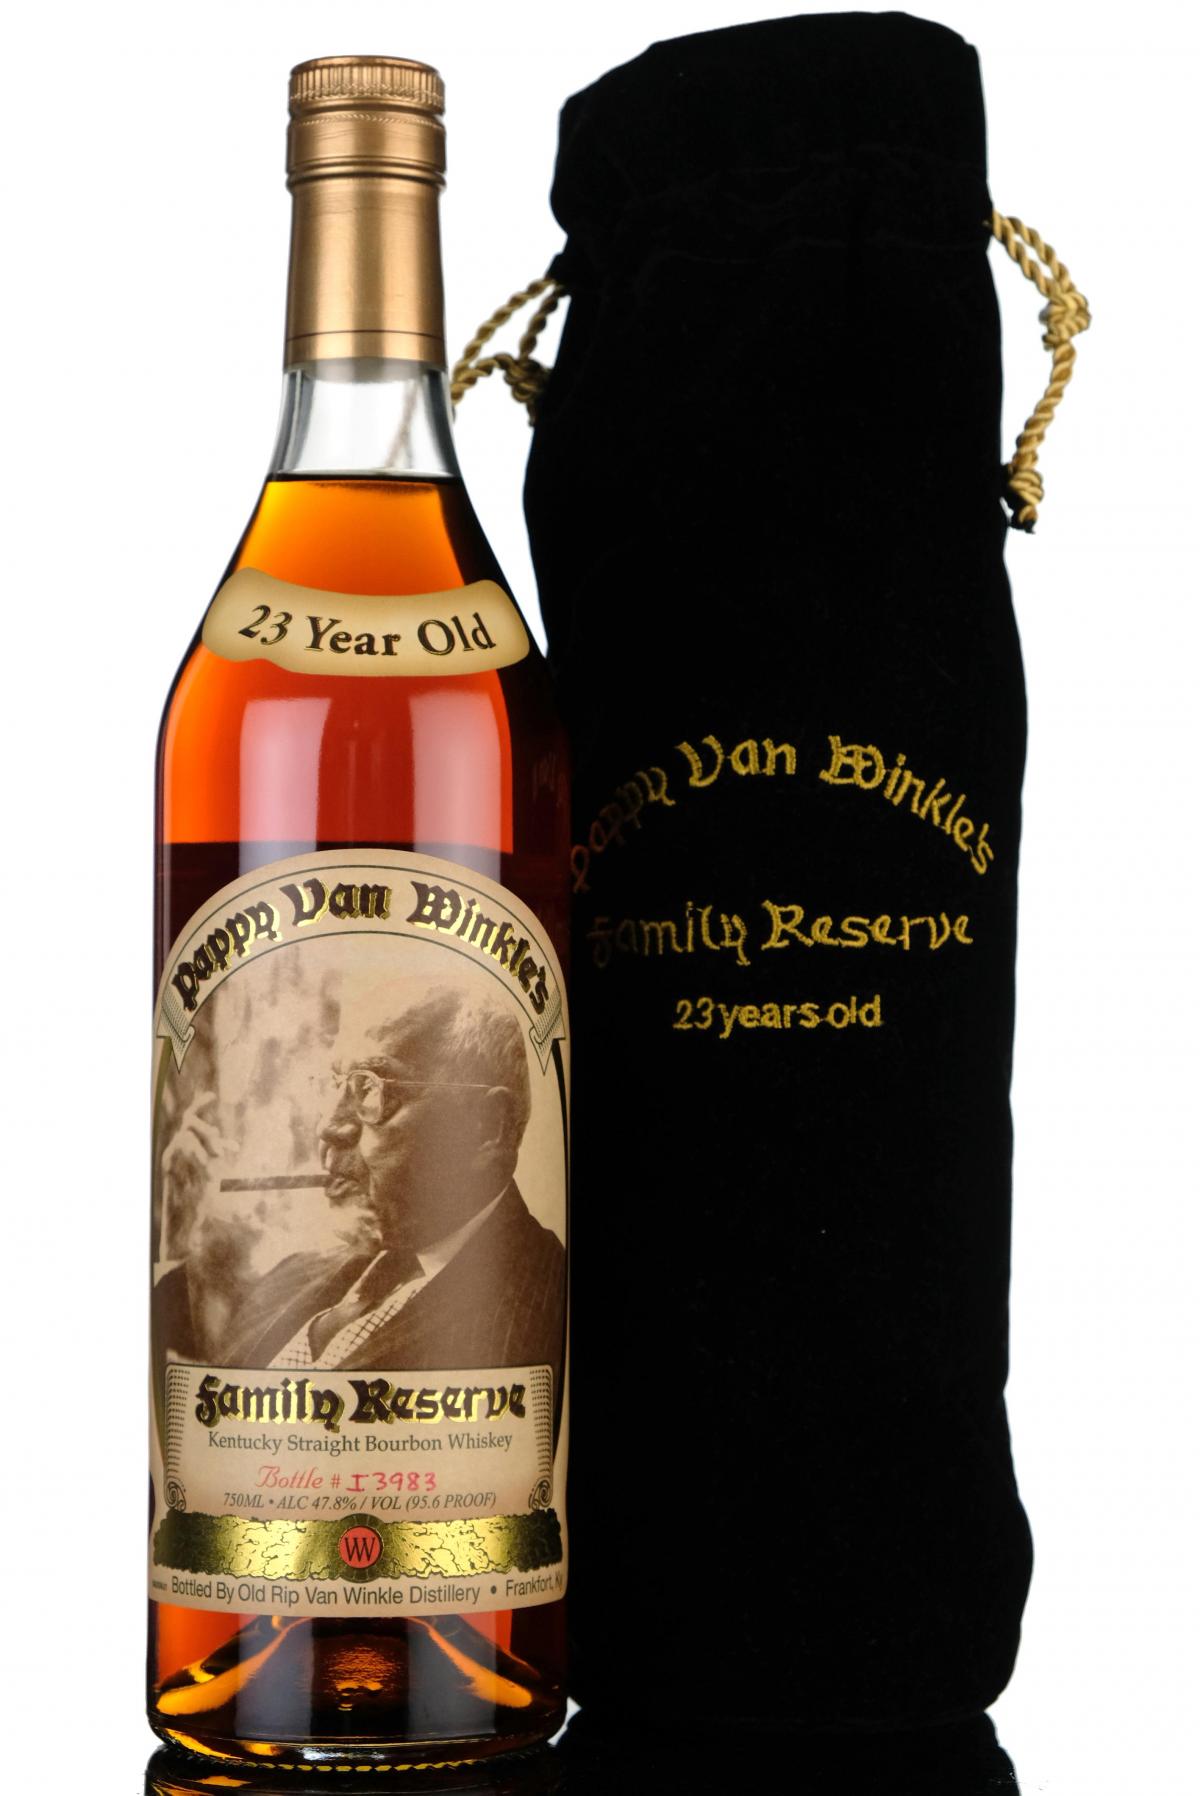 Pappy Van Winkles Family Reserve - 23 Year Old - Kentucky Straight Bourbon Whiskey